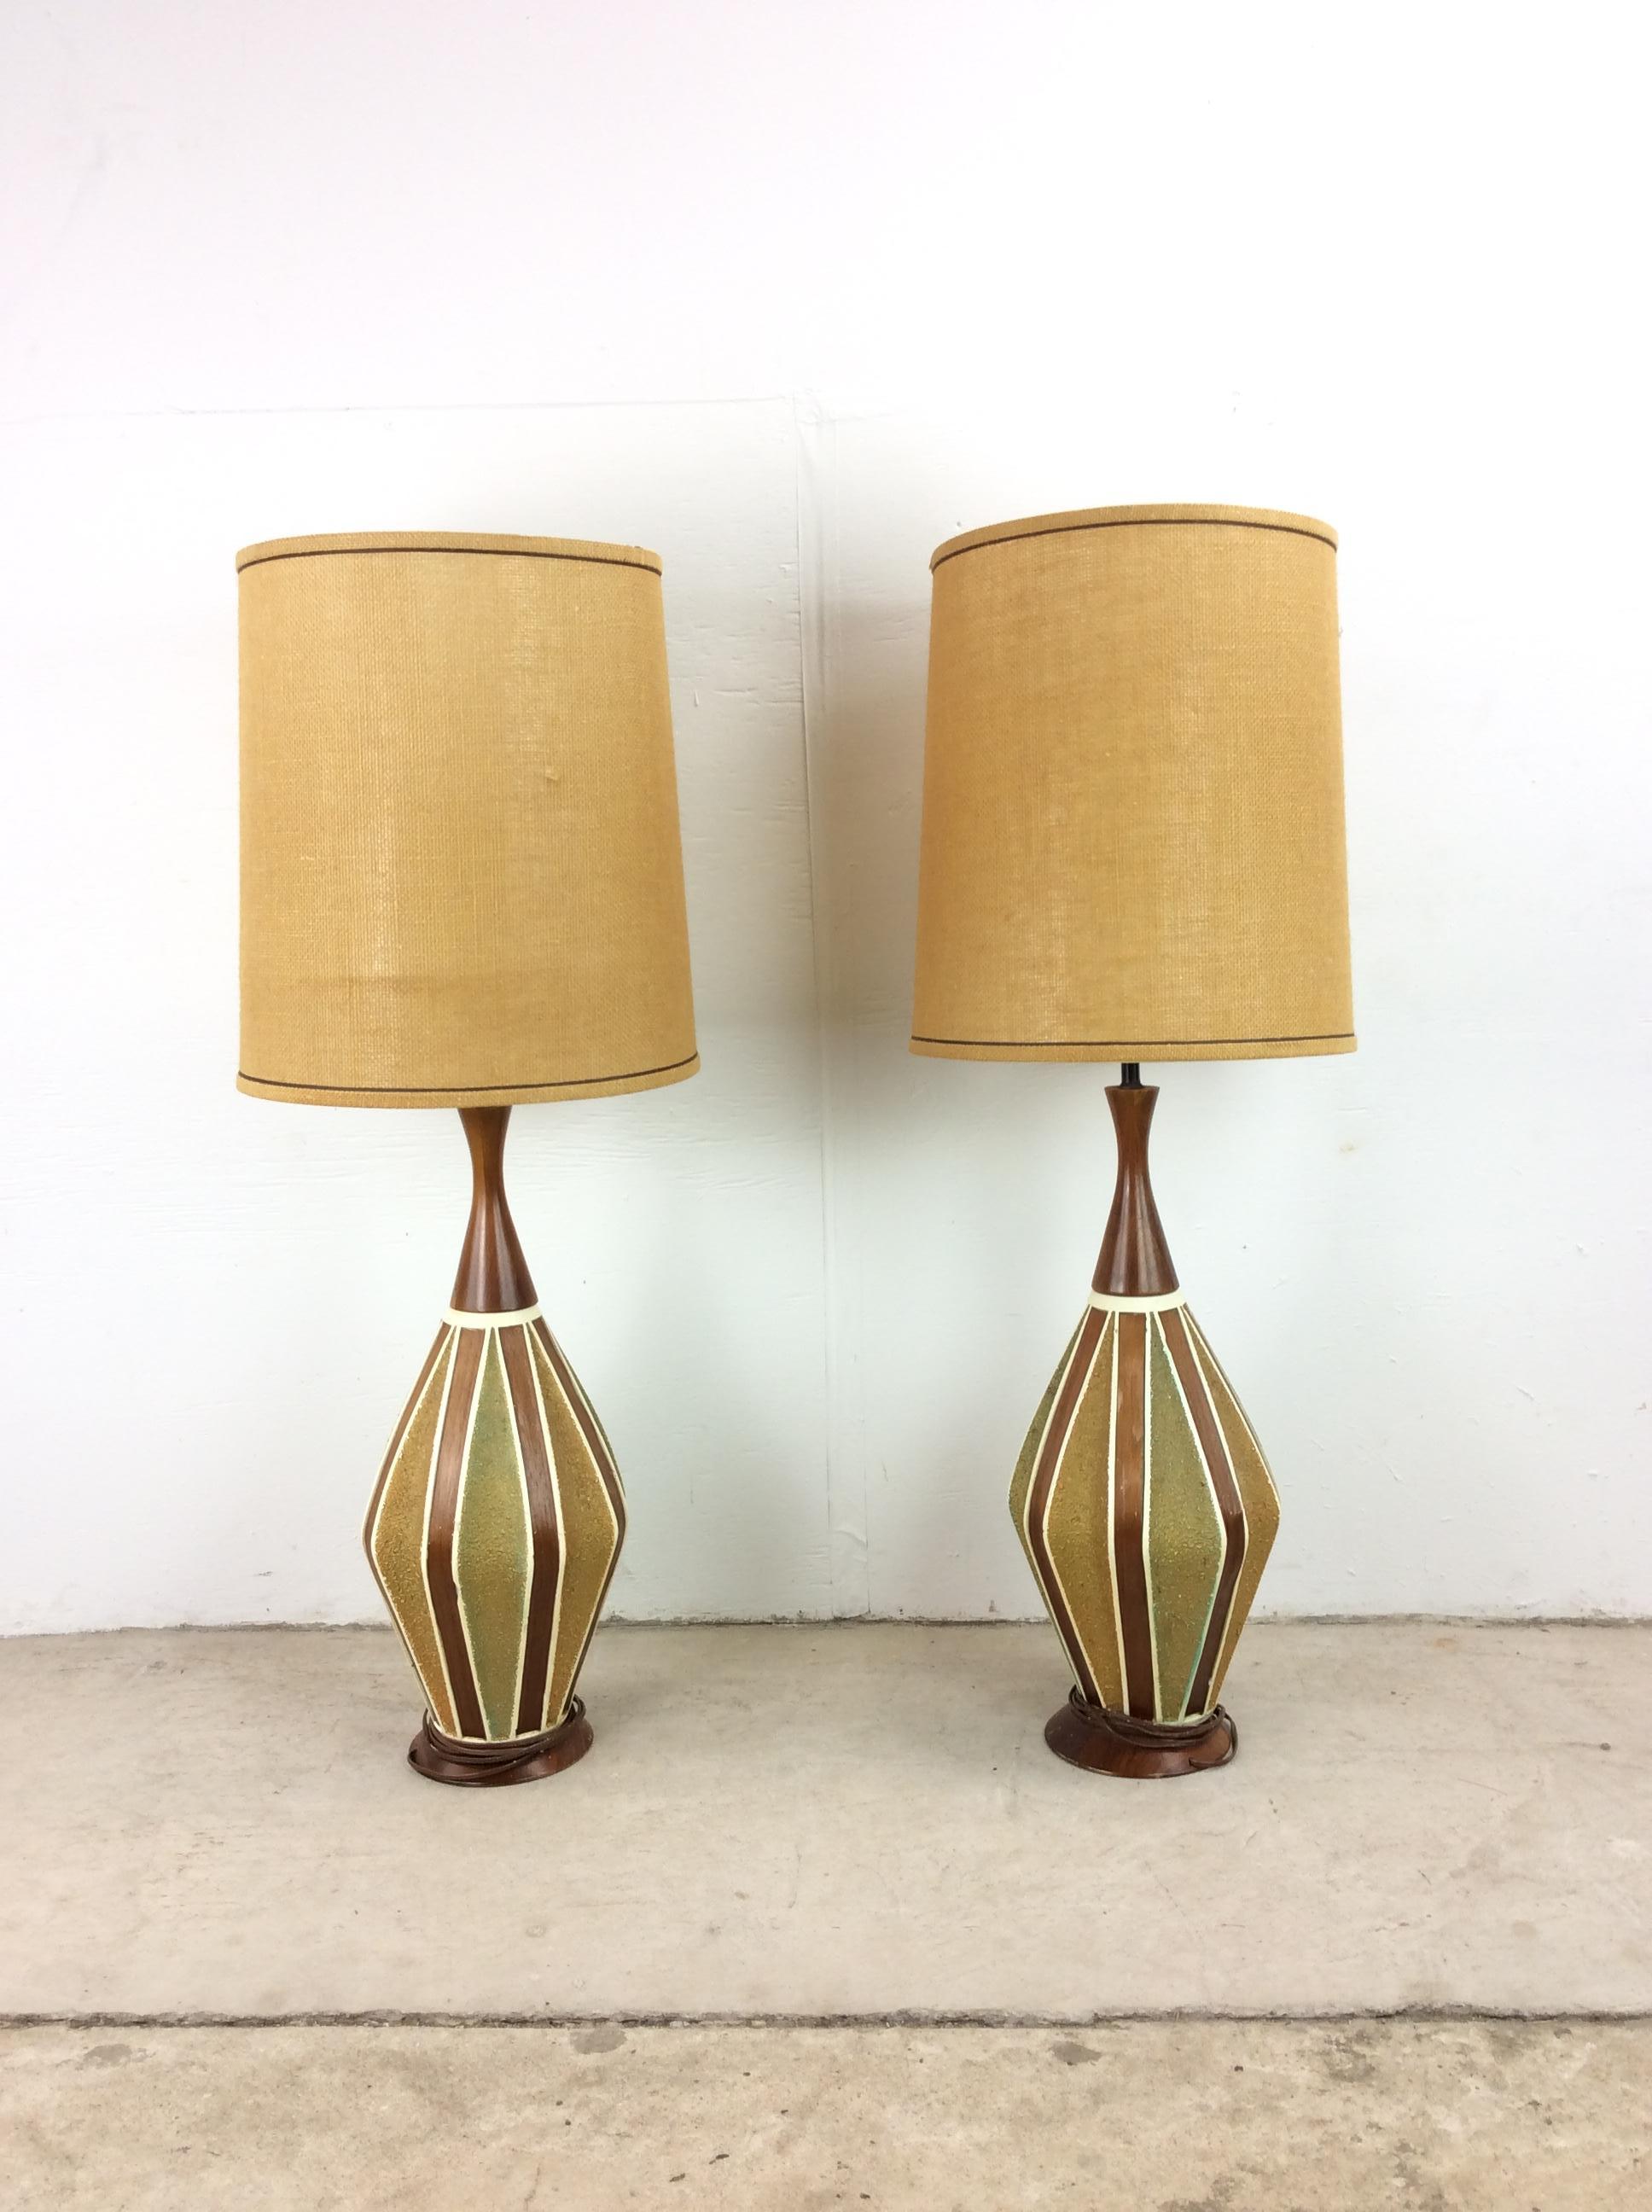 This pair of mid century modern table lamps feature painted ceramic body with wood veneer detailing with a turned wood neck and base.

Dimensions: 9w 9d 41h
Shade diameter: 13.5 inch

Condition: The vintage wiring on this pair of lamps works. The